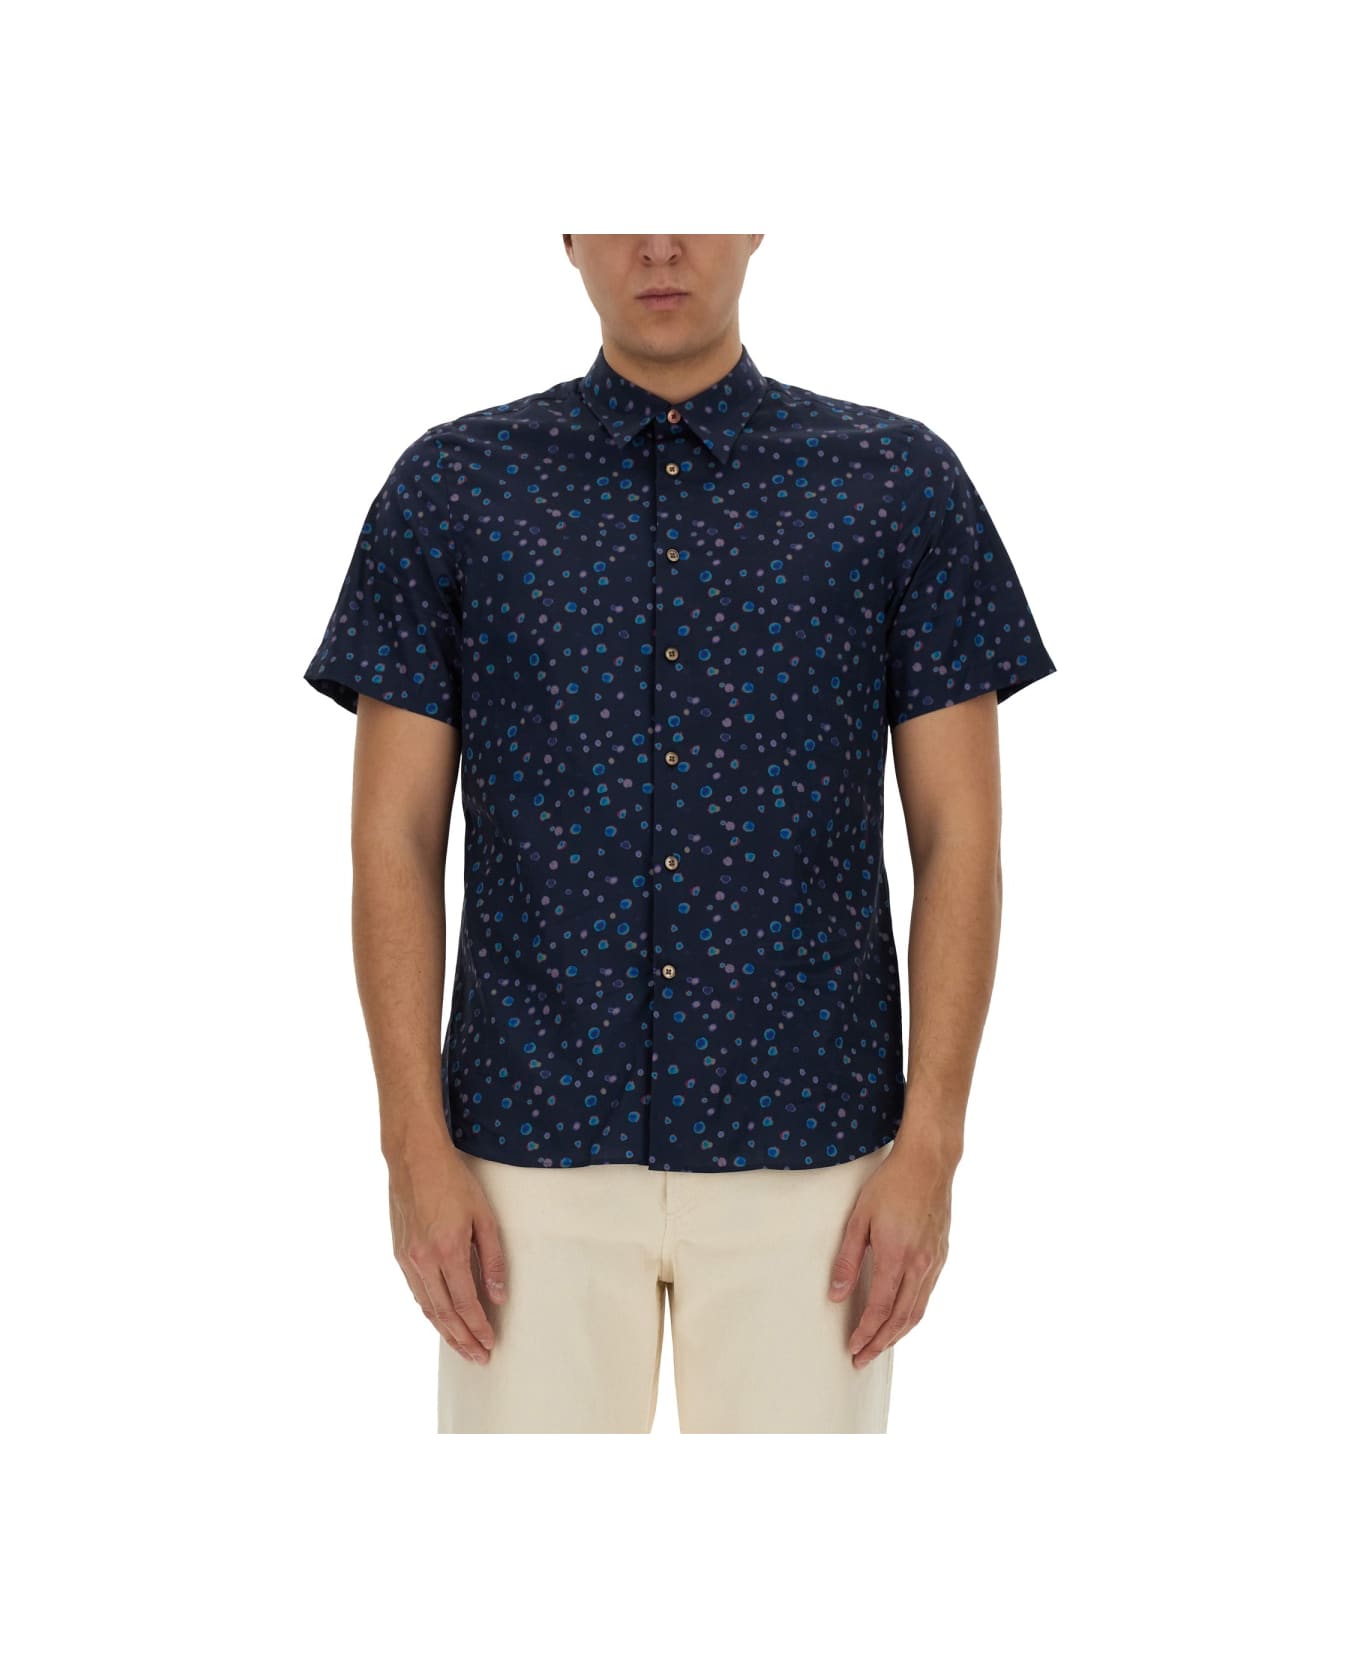 PS by Paul Smith Printed Shirt - MULTICOLOUR